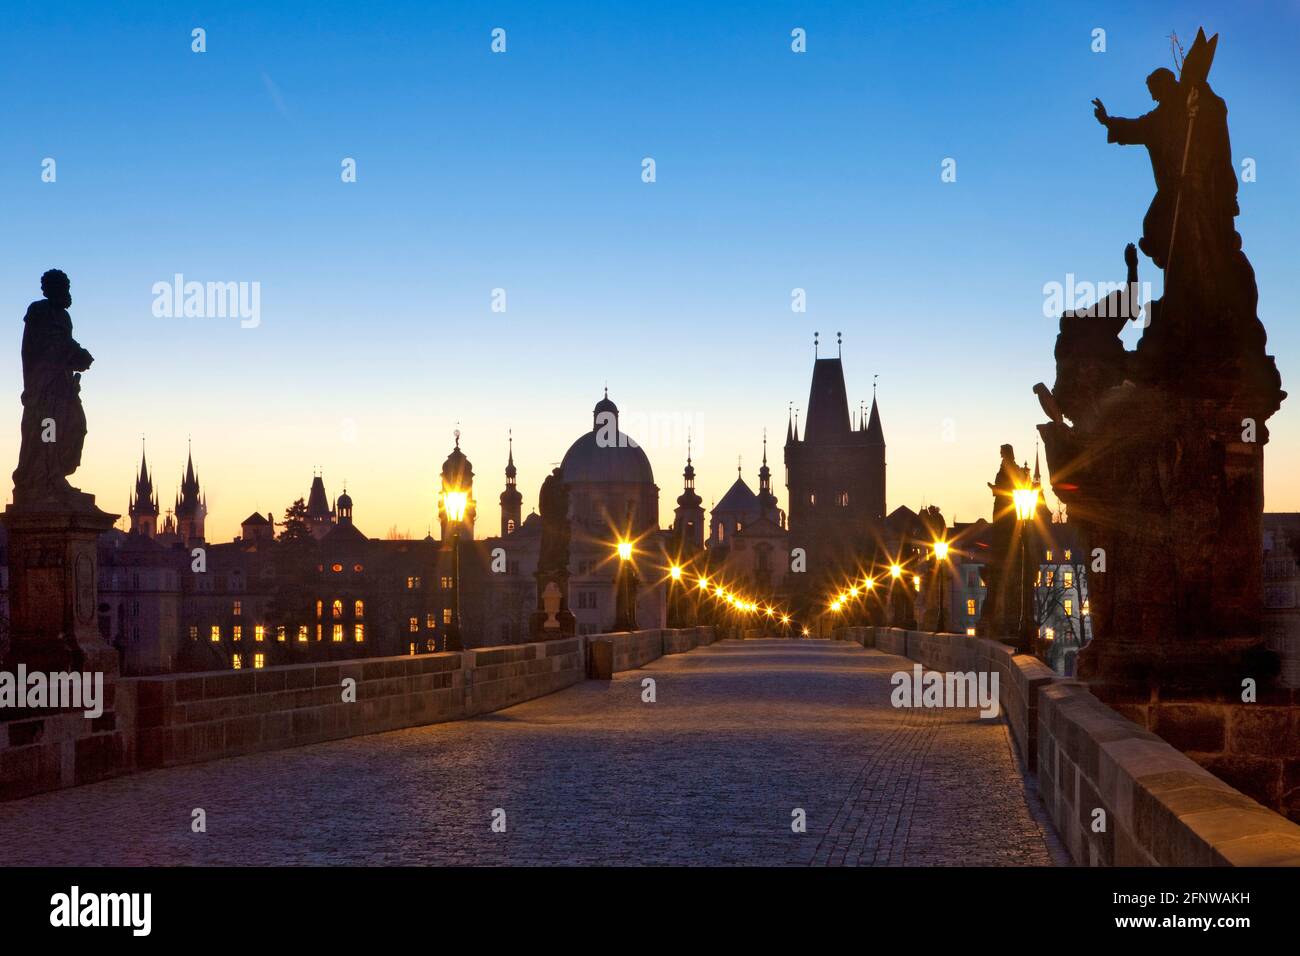 Prague, Czechia - Charles bridge and spires of the Old town.at dawn. Stock Photo